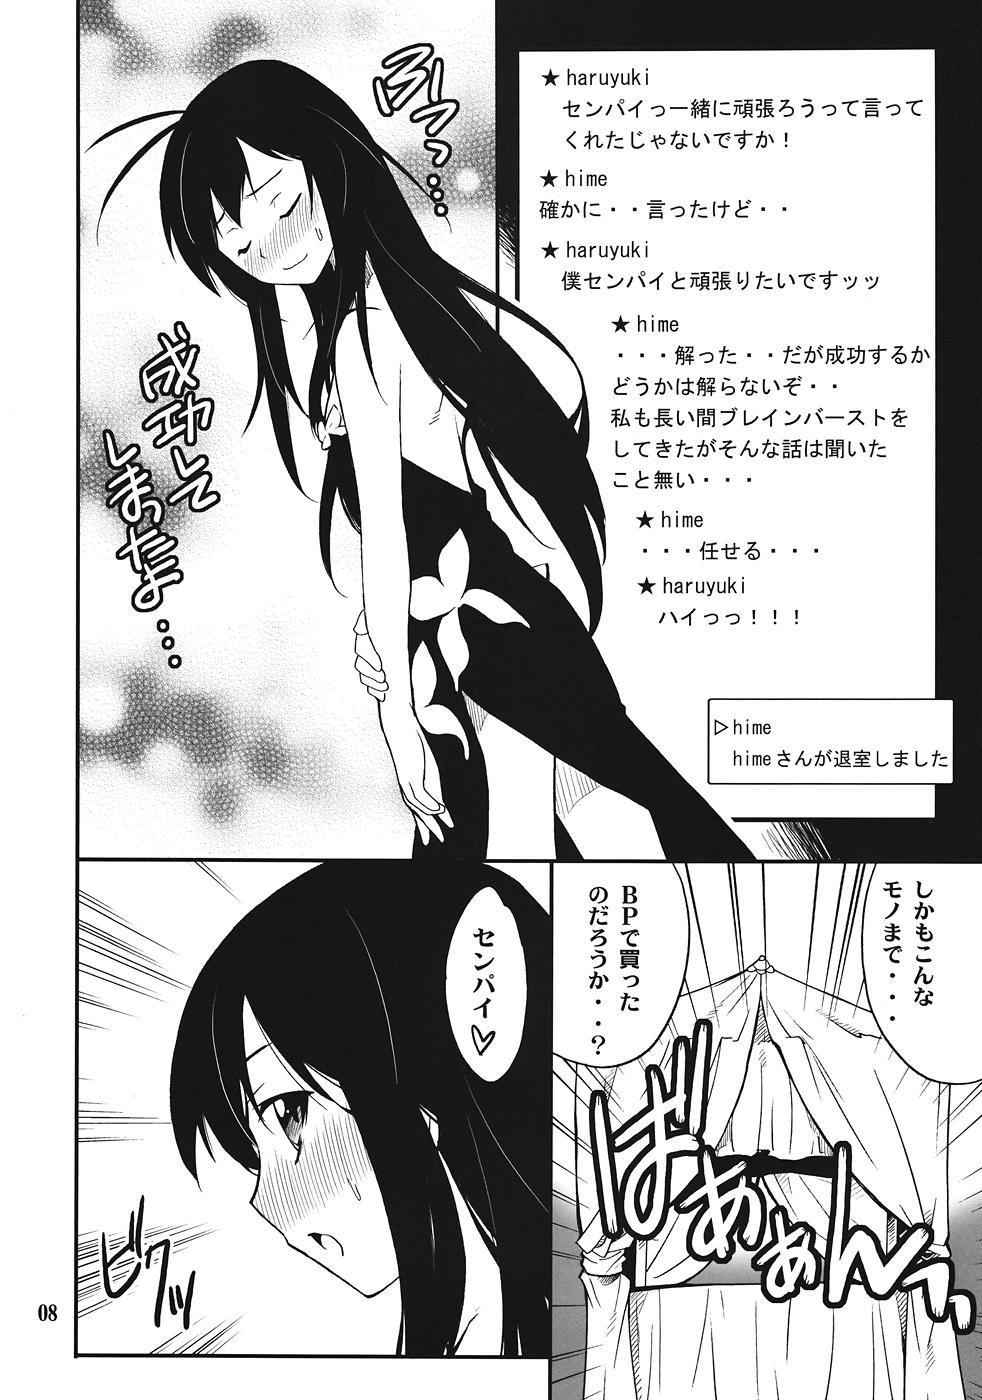 Dick Sucking Another World - Accel world Free Hardcore - Page 7